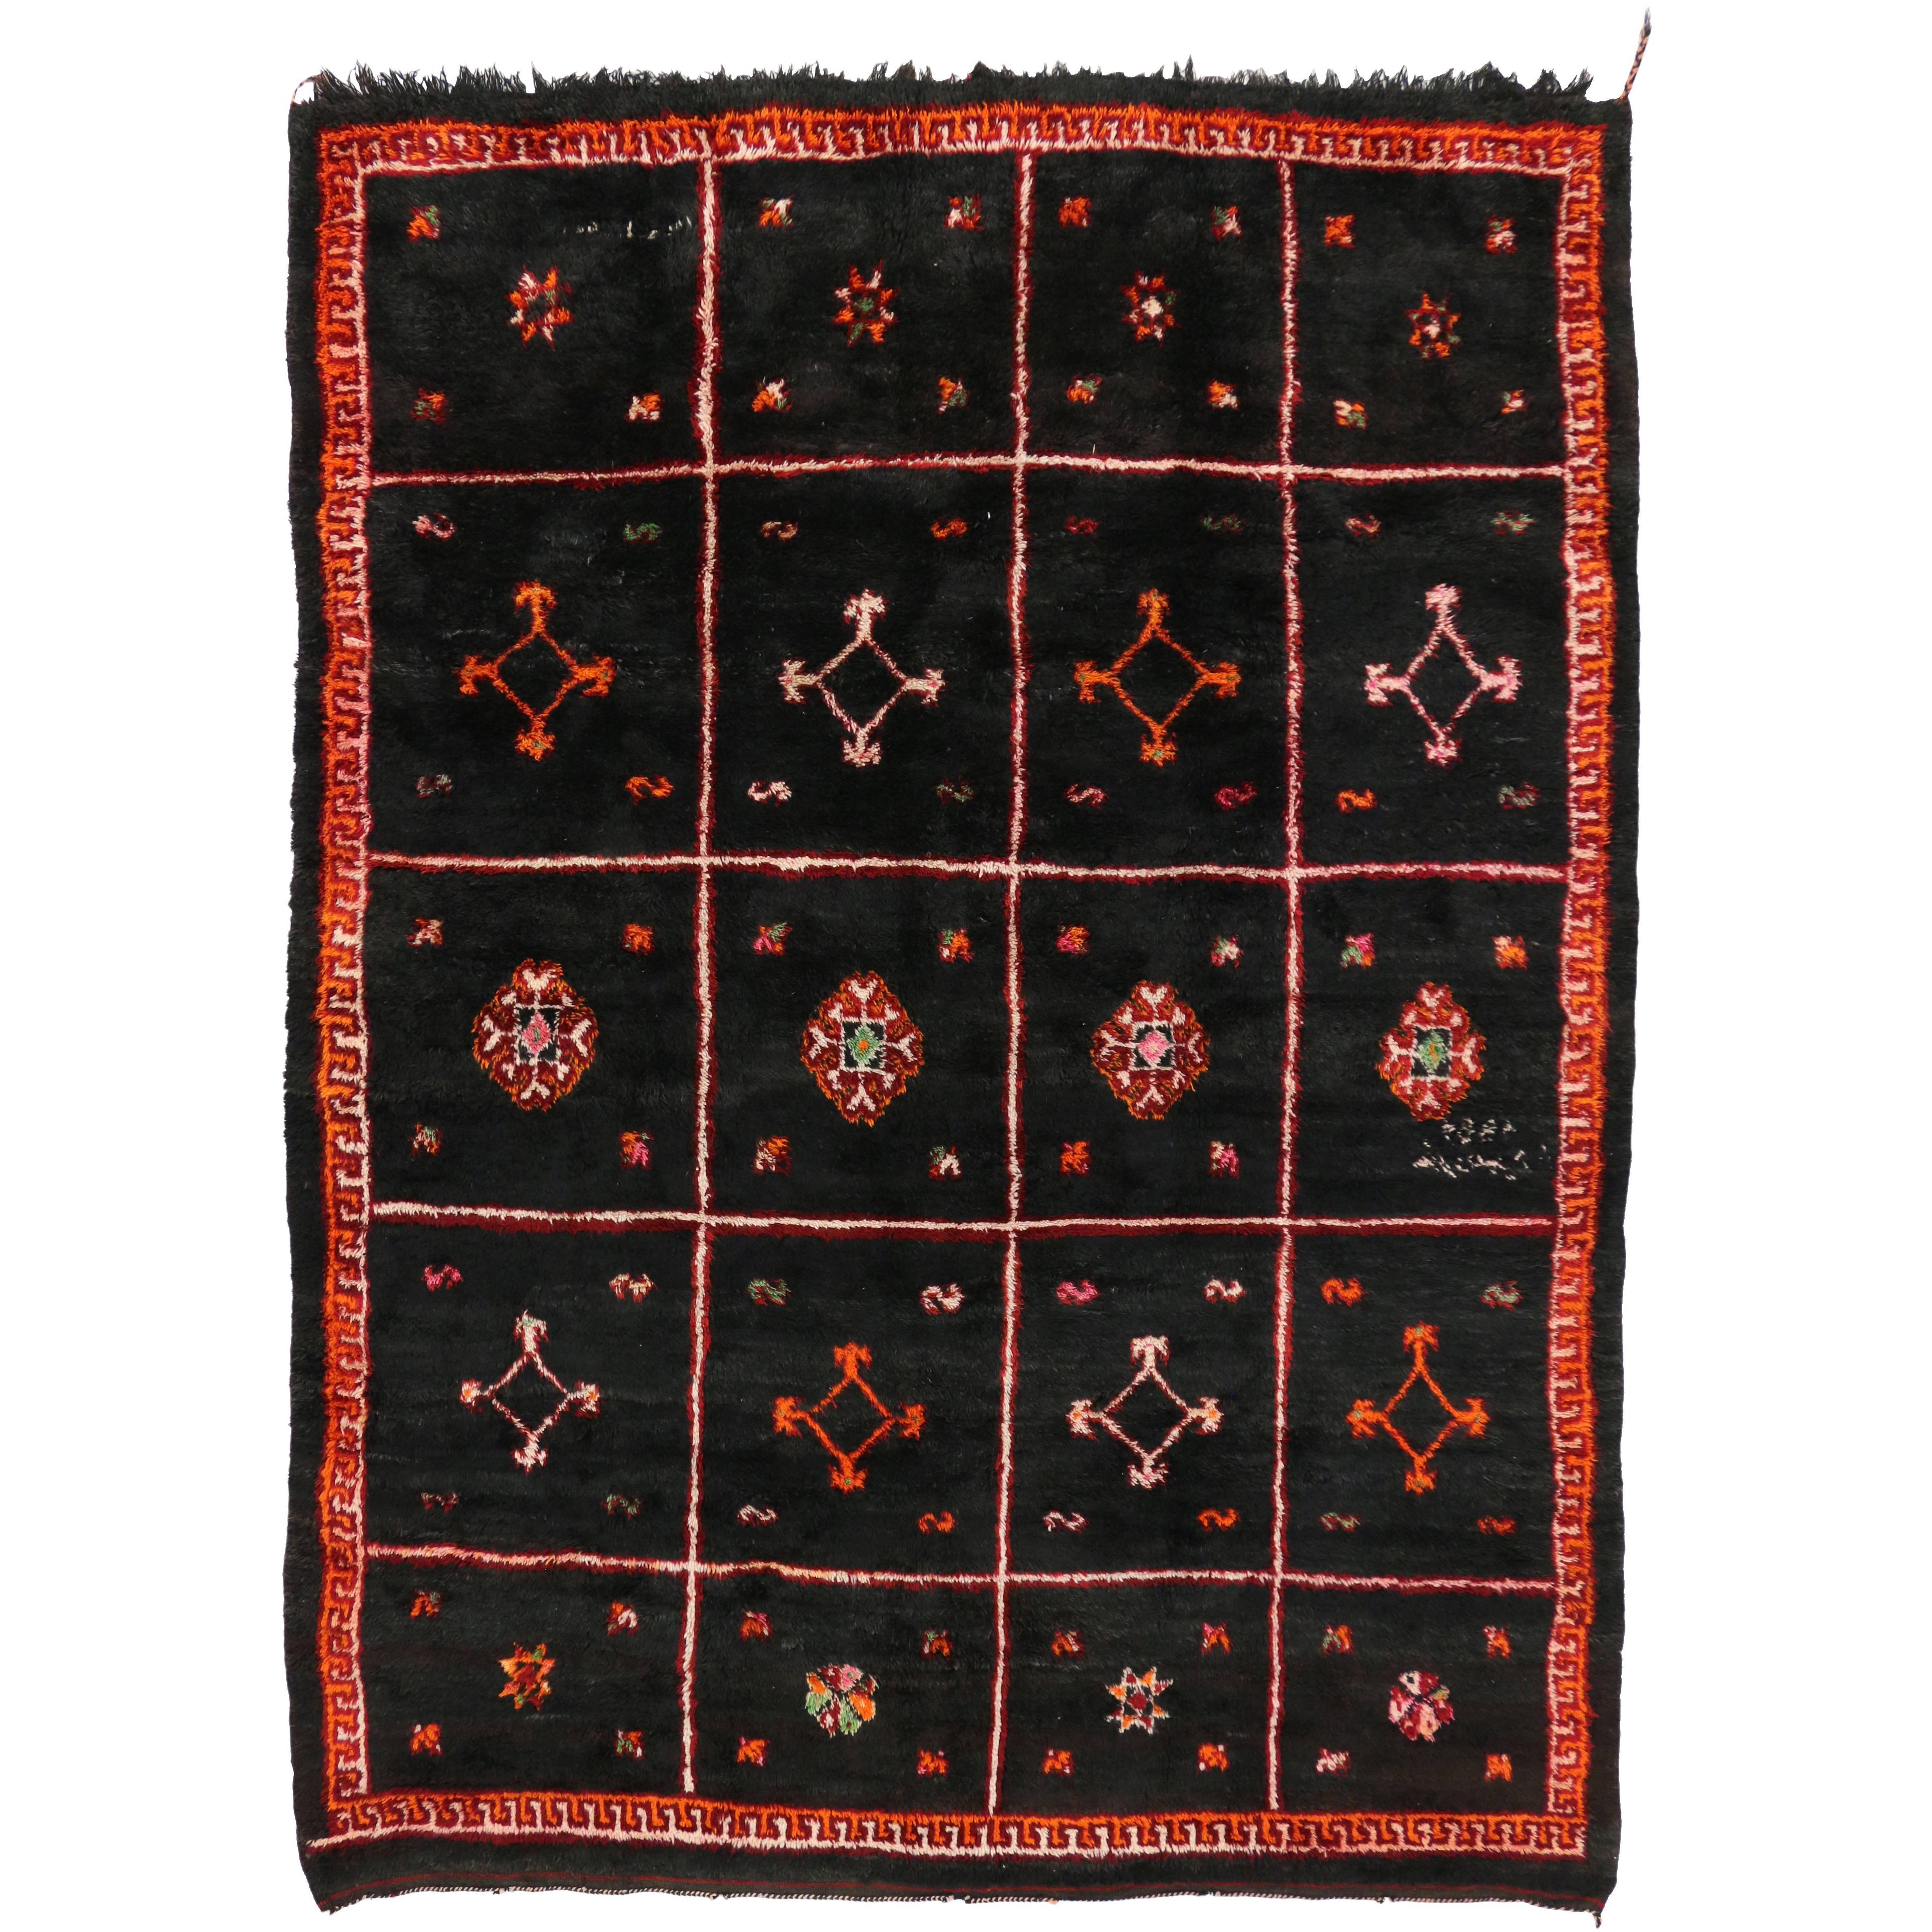 Vintage Moroccan Rug, Black Moroccan Area Rug with Tribal Style